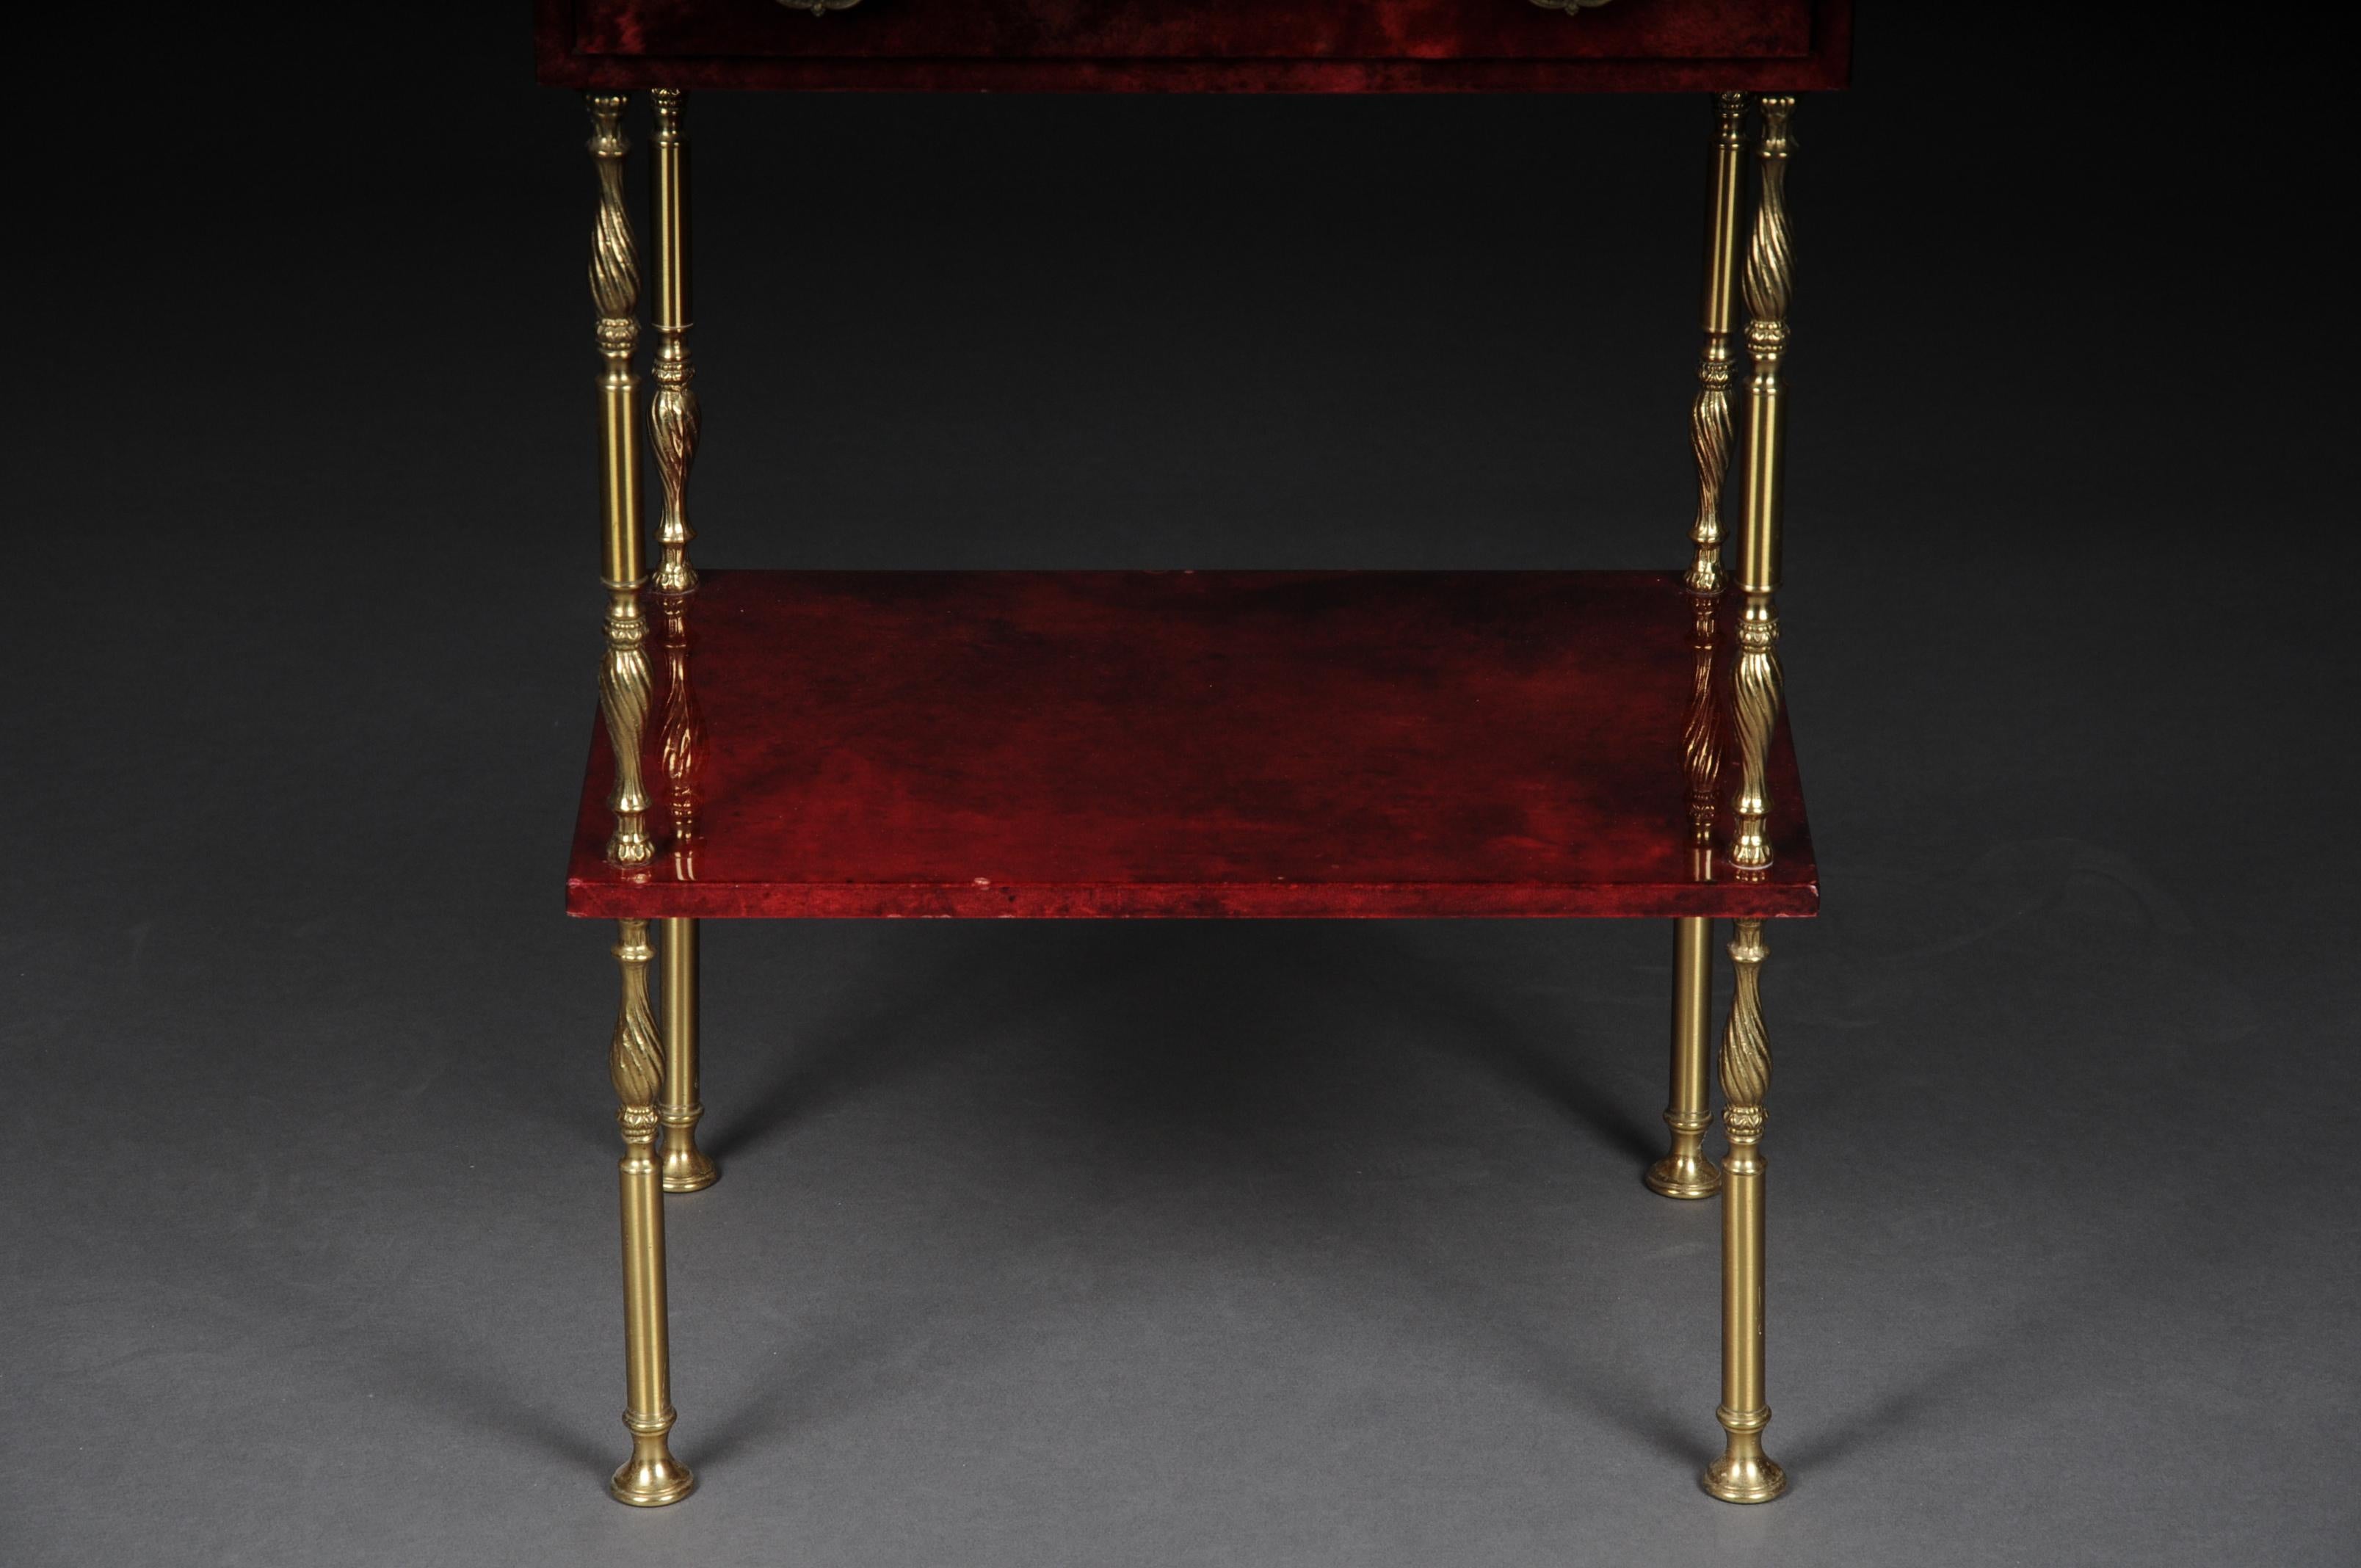 Painted Exclusive Italian Vintage Side Table, Aldo Tura, Red, 1970s